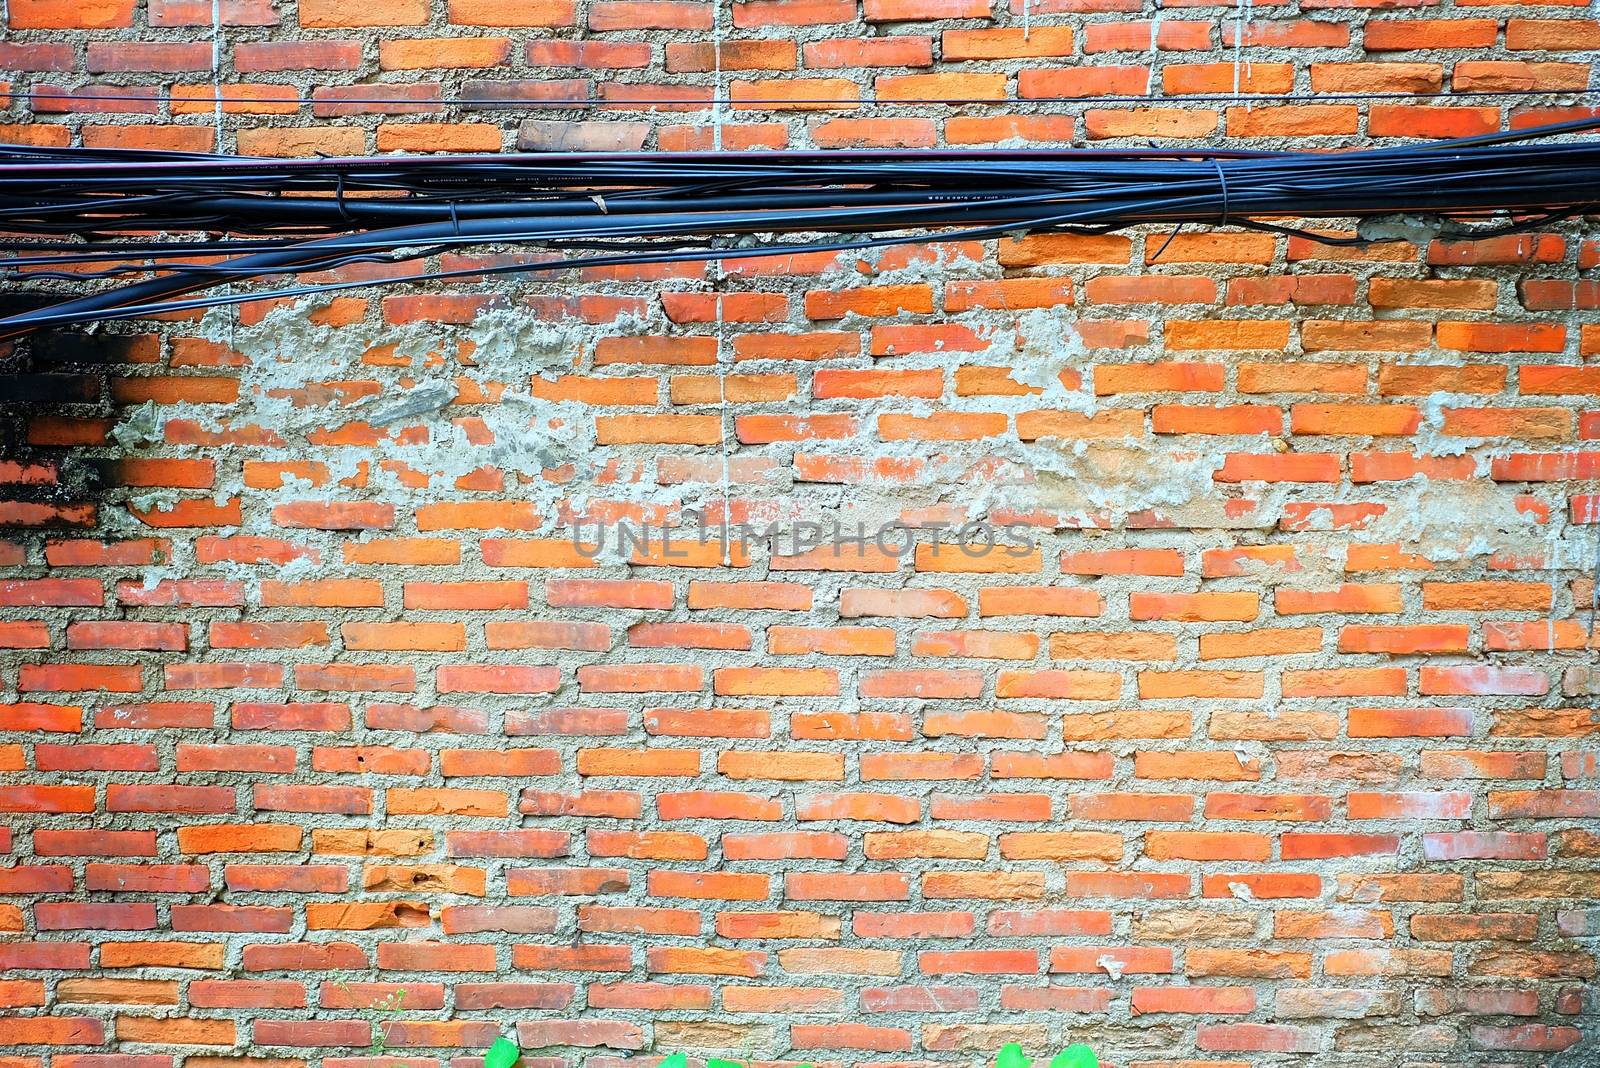 Messy Electrical Wires with Broken Old Brick Wall. by mesamong